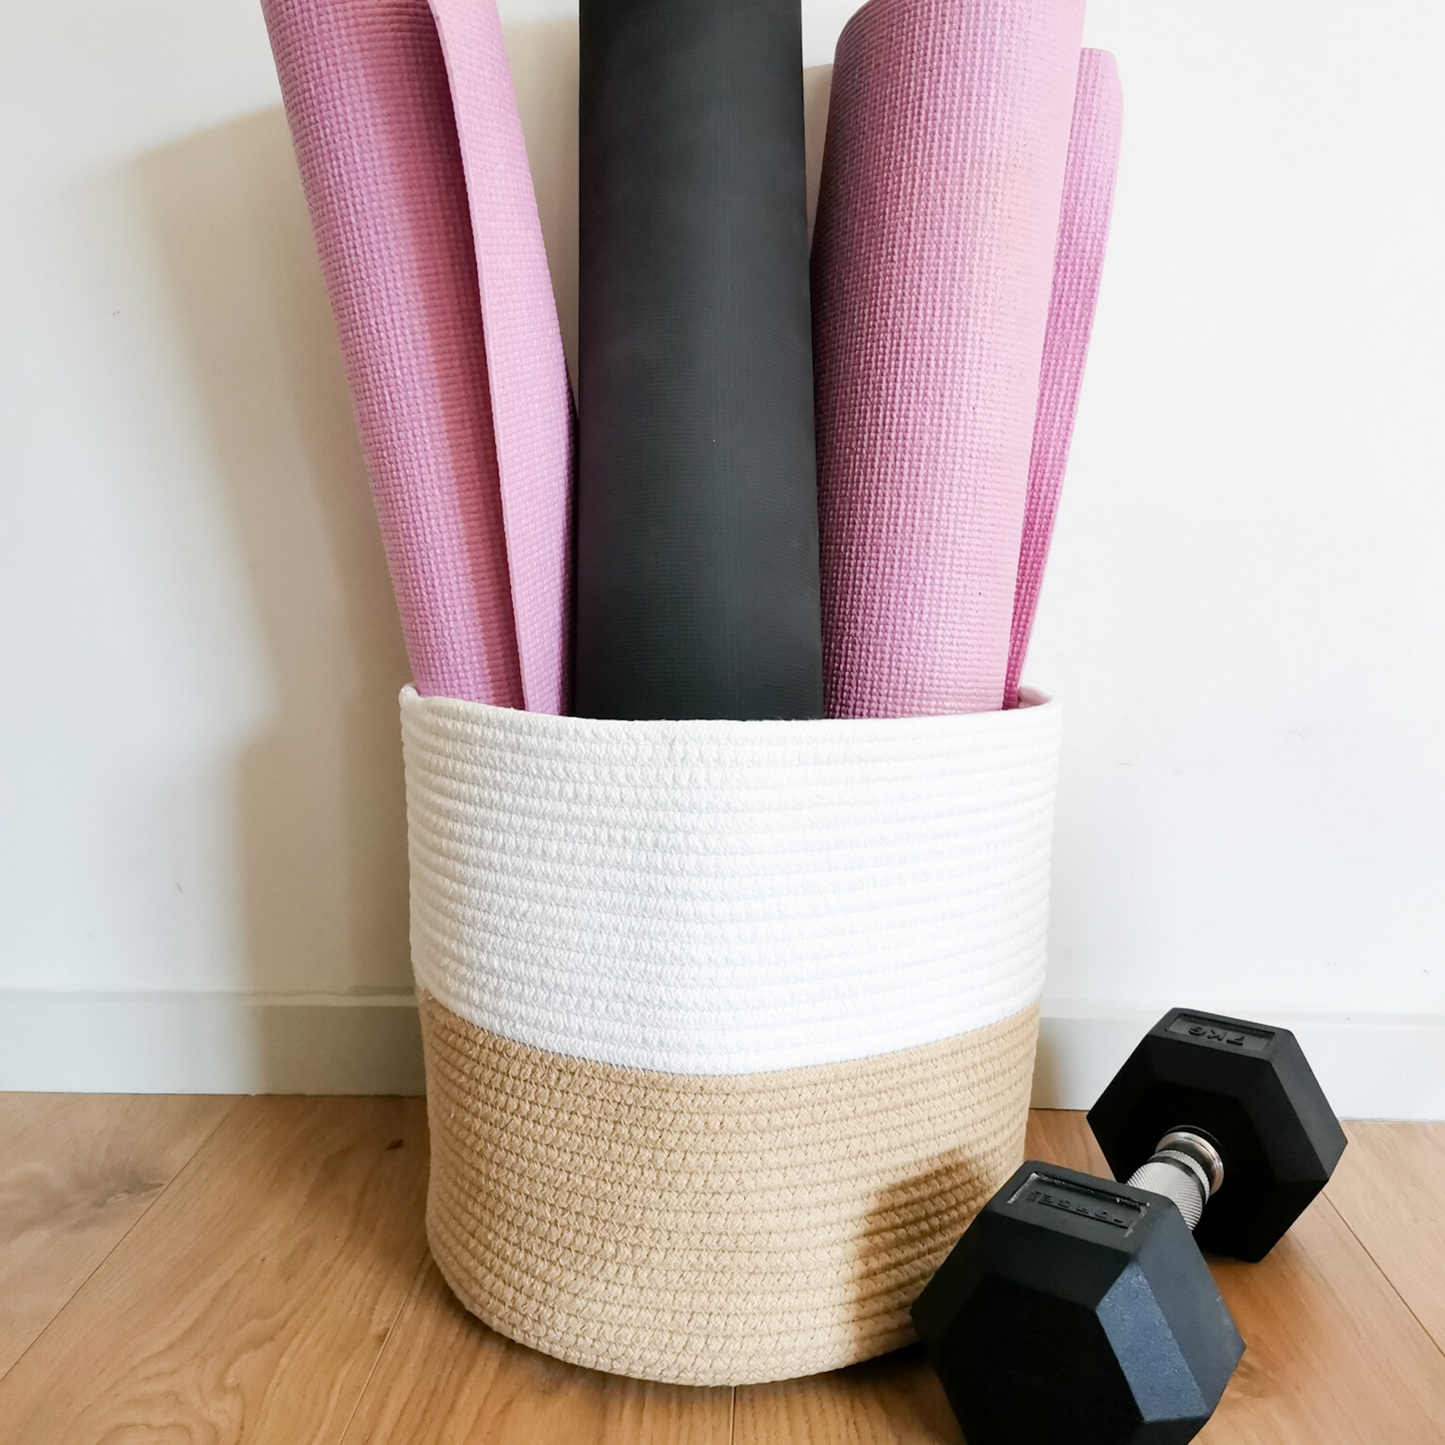 Sturdy handwoven cotton rope baskets for storing gym equipment, kids' toys, yoga mats, laundry, rugs, magazines. Multi-functional and beautiful storage basket.